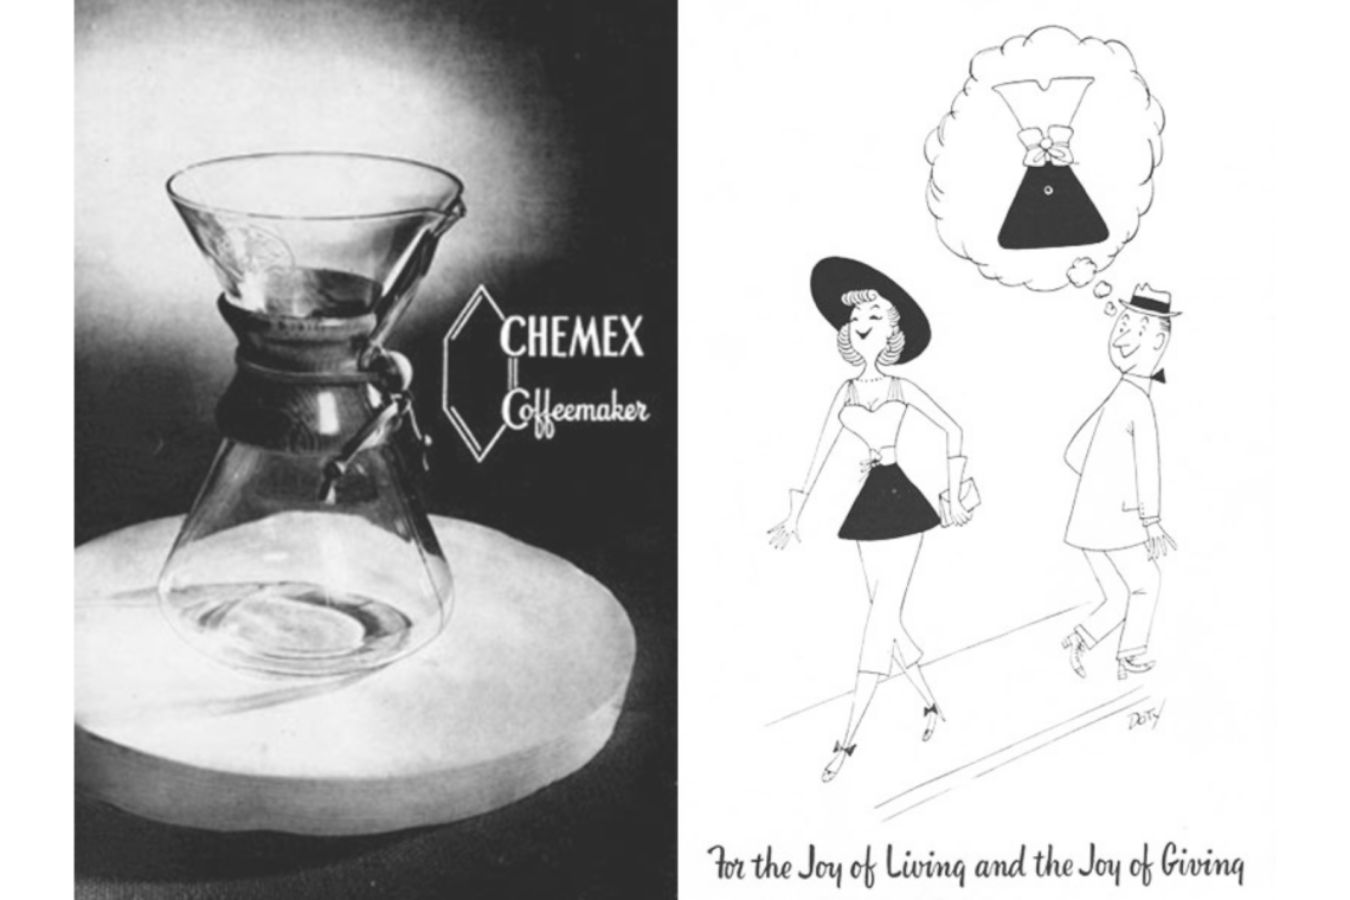 The Iconic Status The Era of Chemex in Brewing Coffee (3)